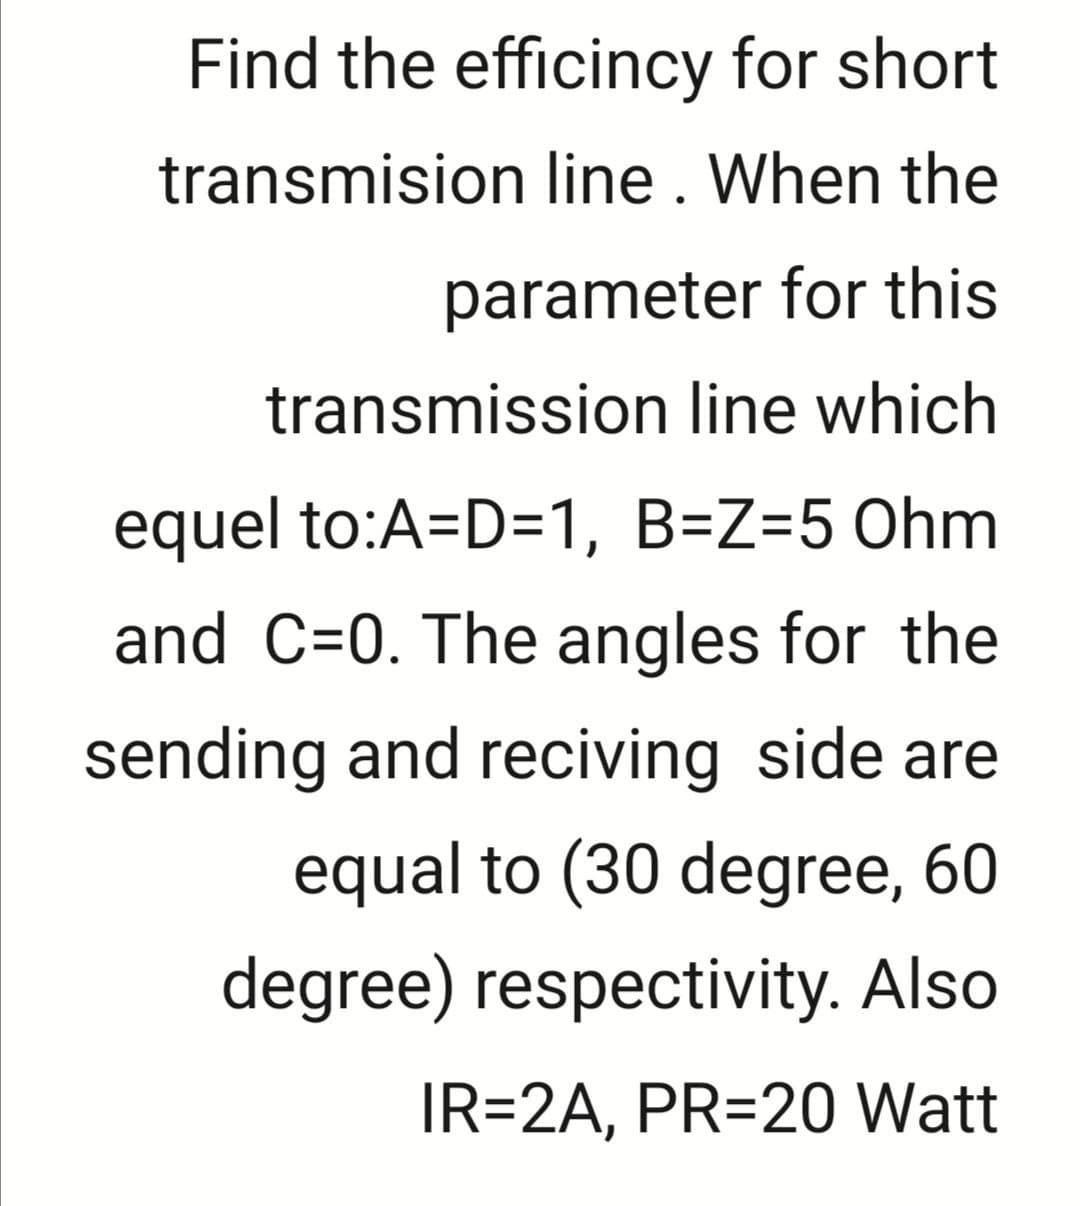 Find the efficincy for short
transmision line. When the
parameter for this
transmission line which
equel to:A=D=1, B=Z=5 Ohm
and C=0. The angles for the
sending and reciving side are
equal to (30 degree, 60
degree) respectivity. Also
IR=2A, PR=20 Watt